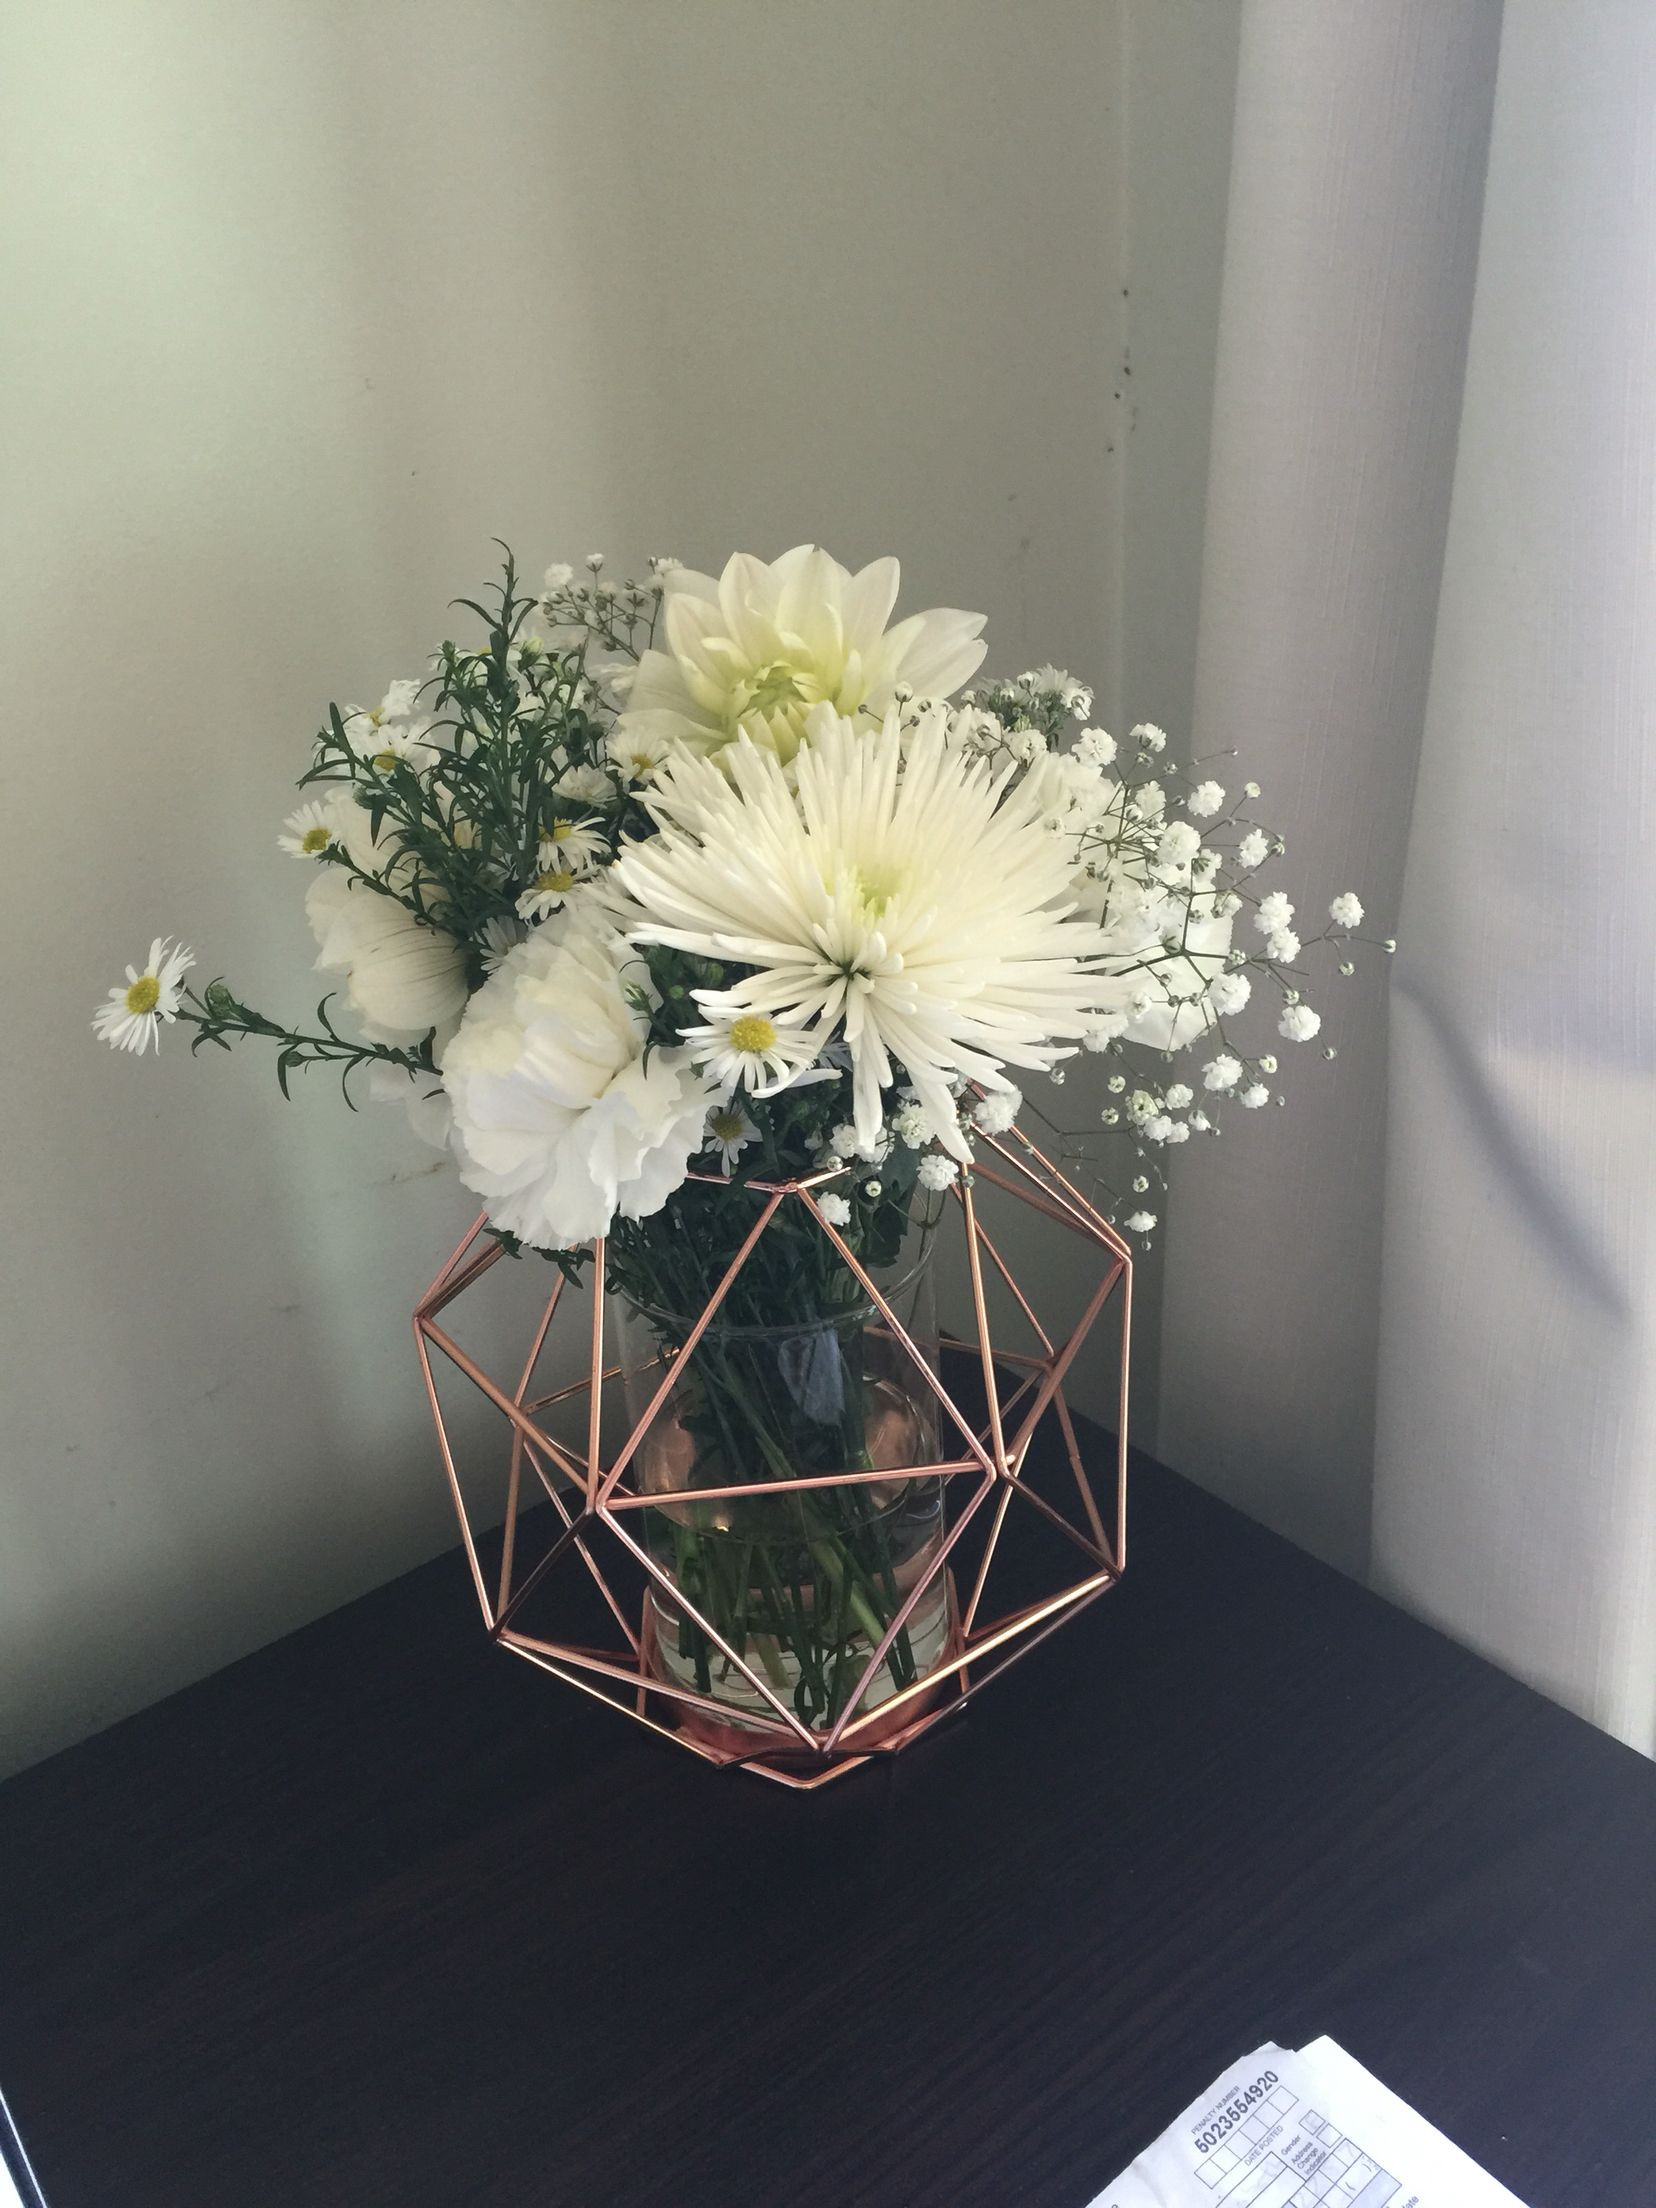 12 Best Rose Colored Glass Vase 2024 free download rose colored glass vase of copper geometric candle holder from kmart used as a vase wedding with regard to copper geometric candle holder from kmart used as a vase